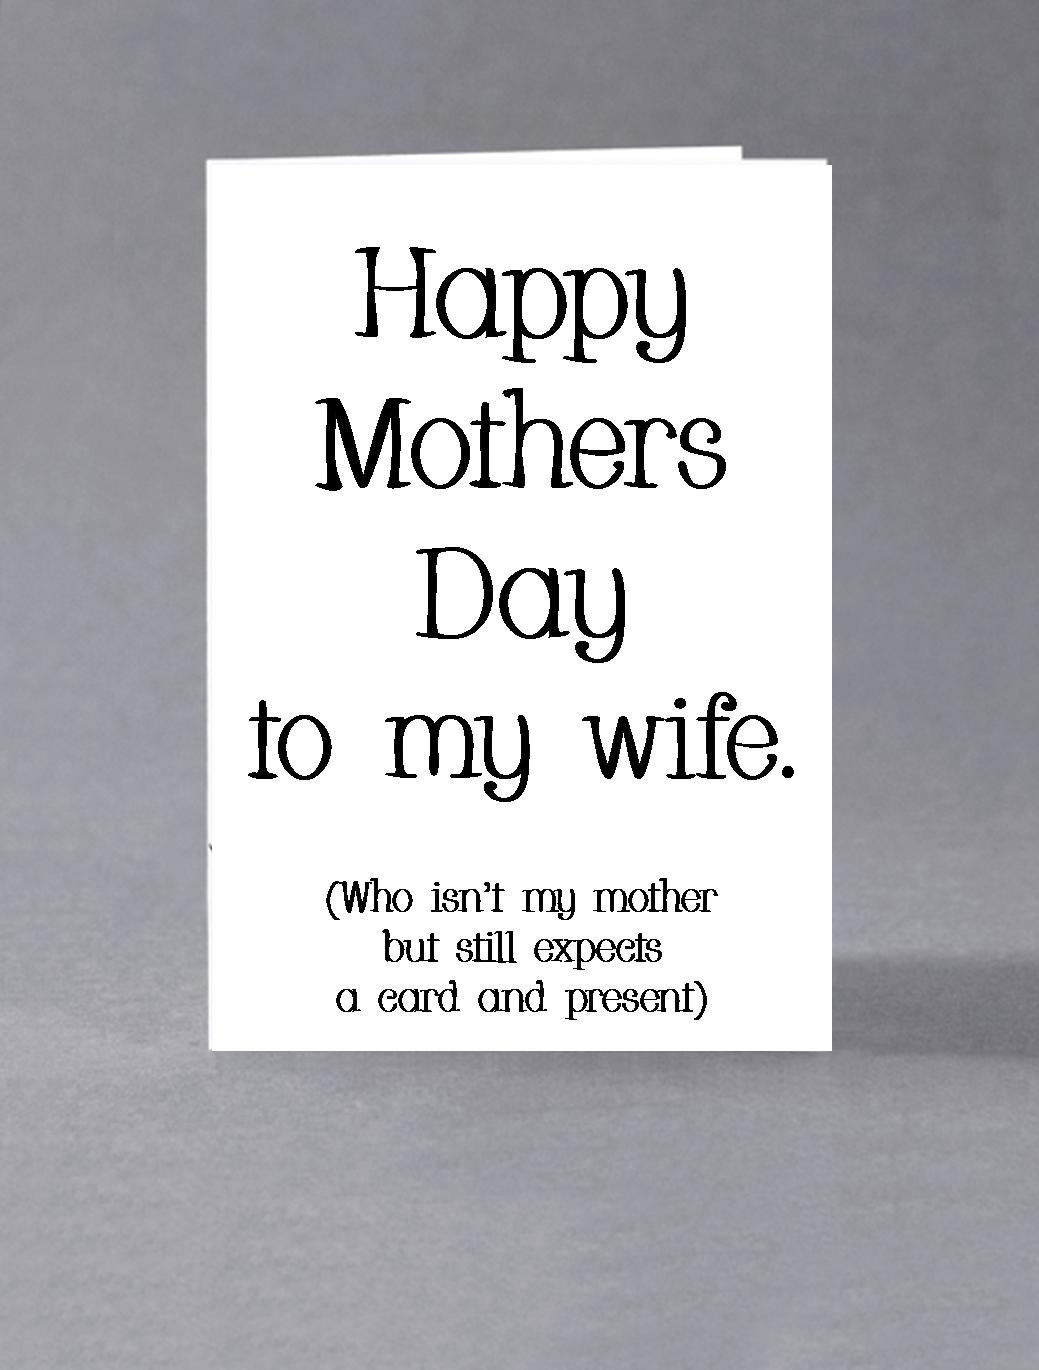 Funny Sarcastic Mothers Day Card Happy Mothers Day To